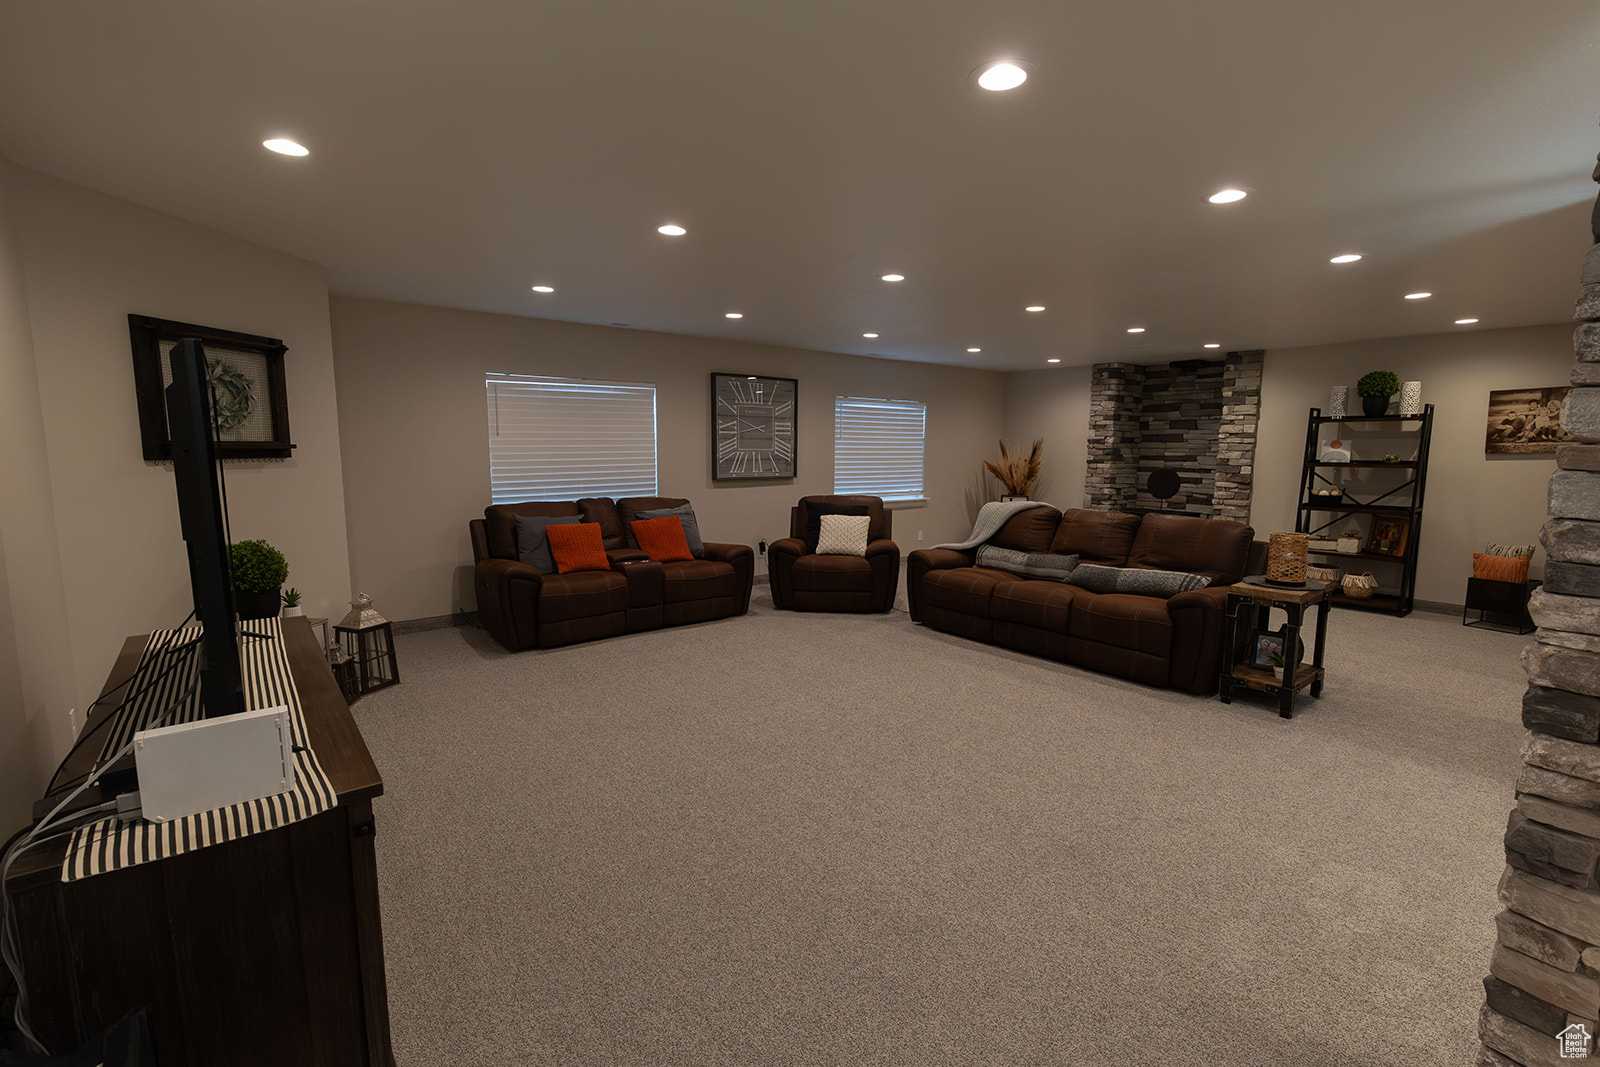 View of carpeted living room